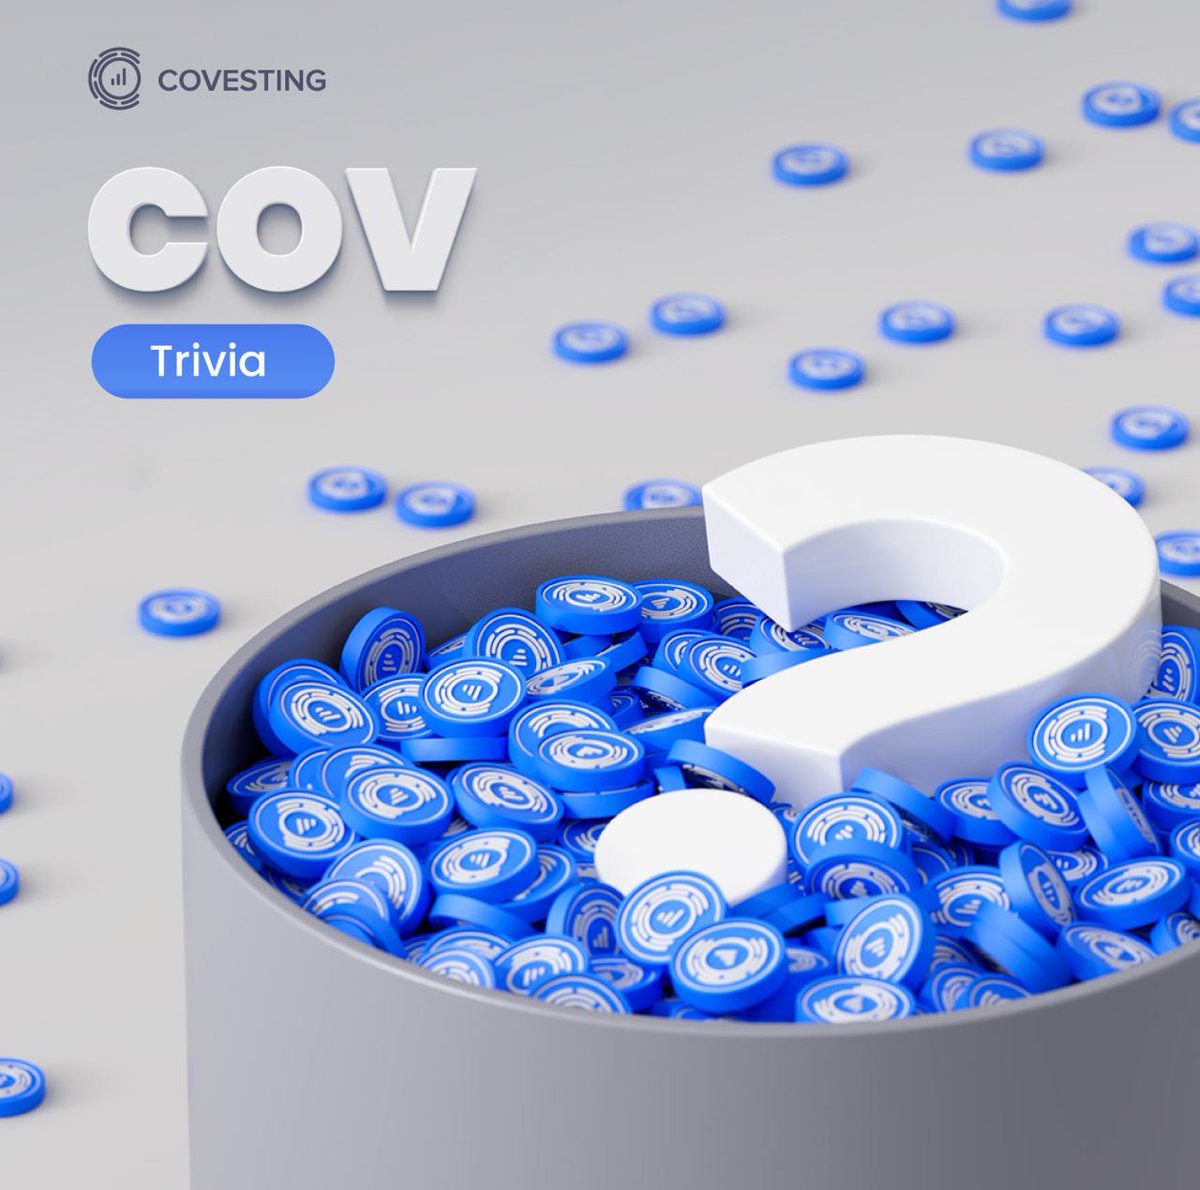 💡 Let's test your knowledge, #Covesters! What is the current circulating supply of the #Covesting utility token, $COV?

💭Drop your answer in the comments for a chance to win 250 $COV! One lucky winner will be selected from the correct responses. 

🚀 Ready, set, go!